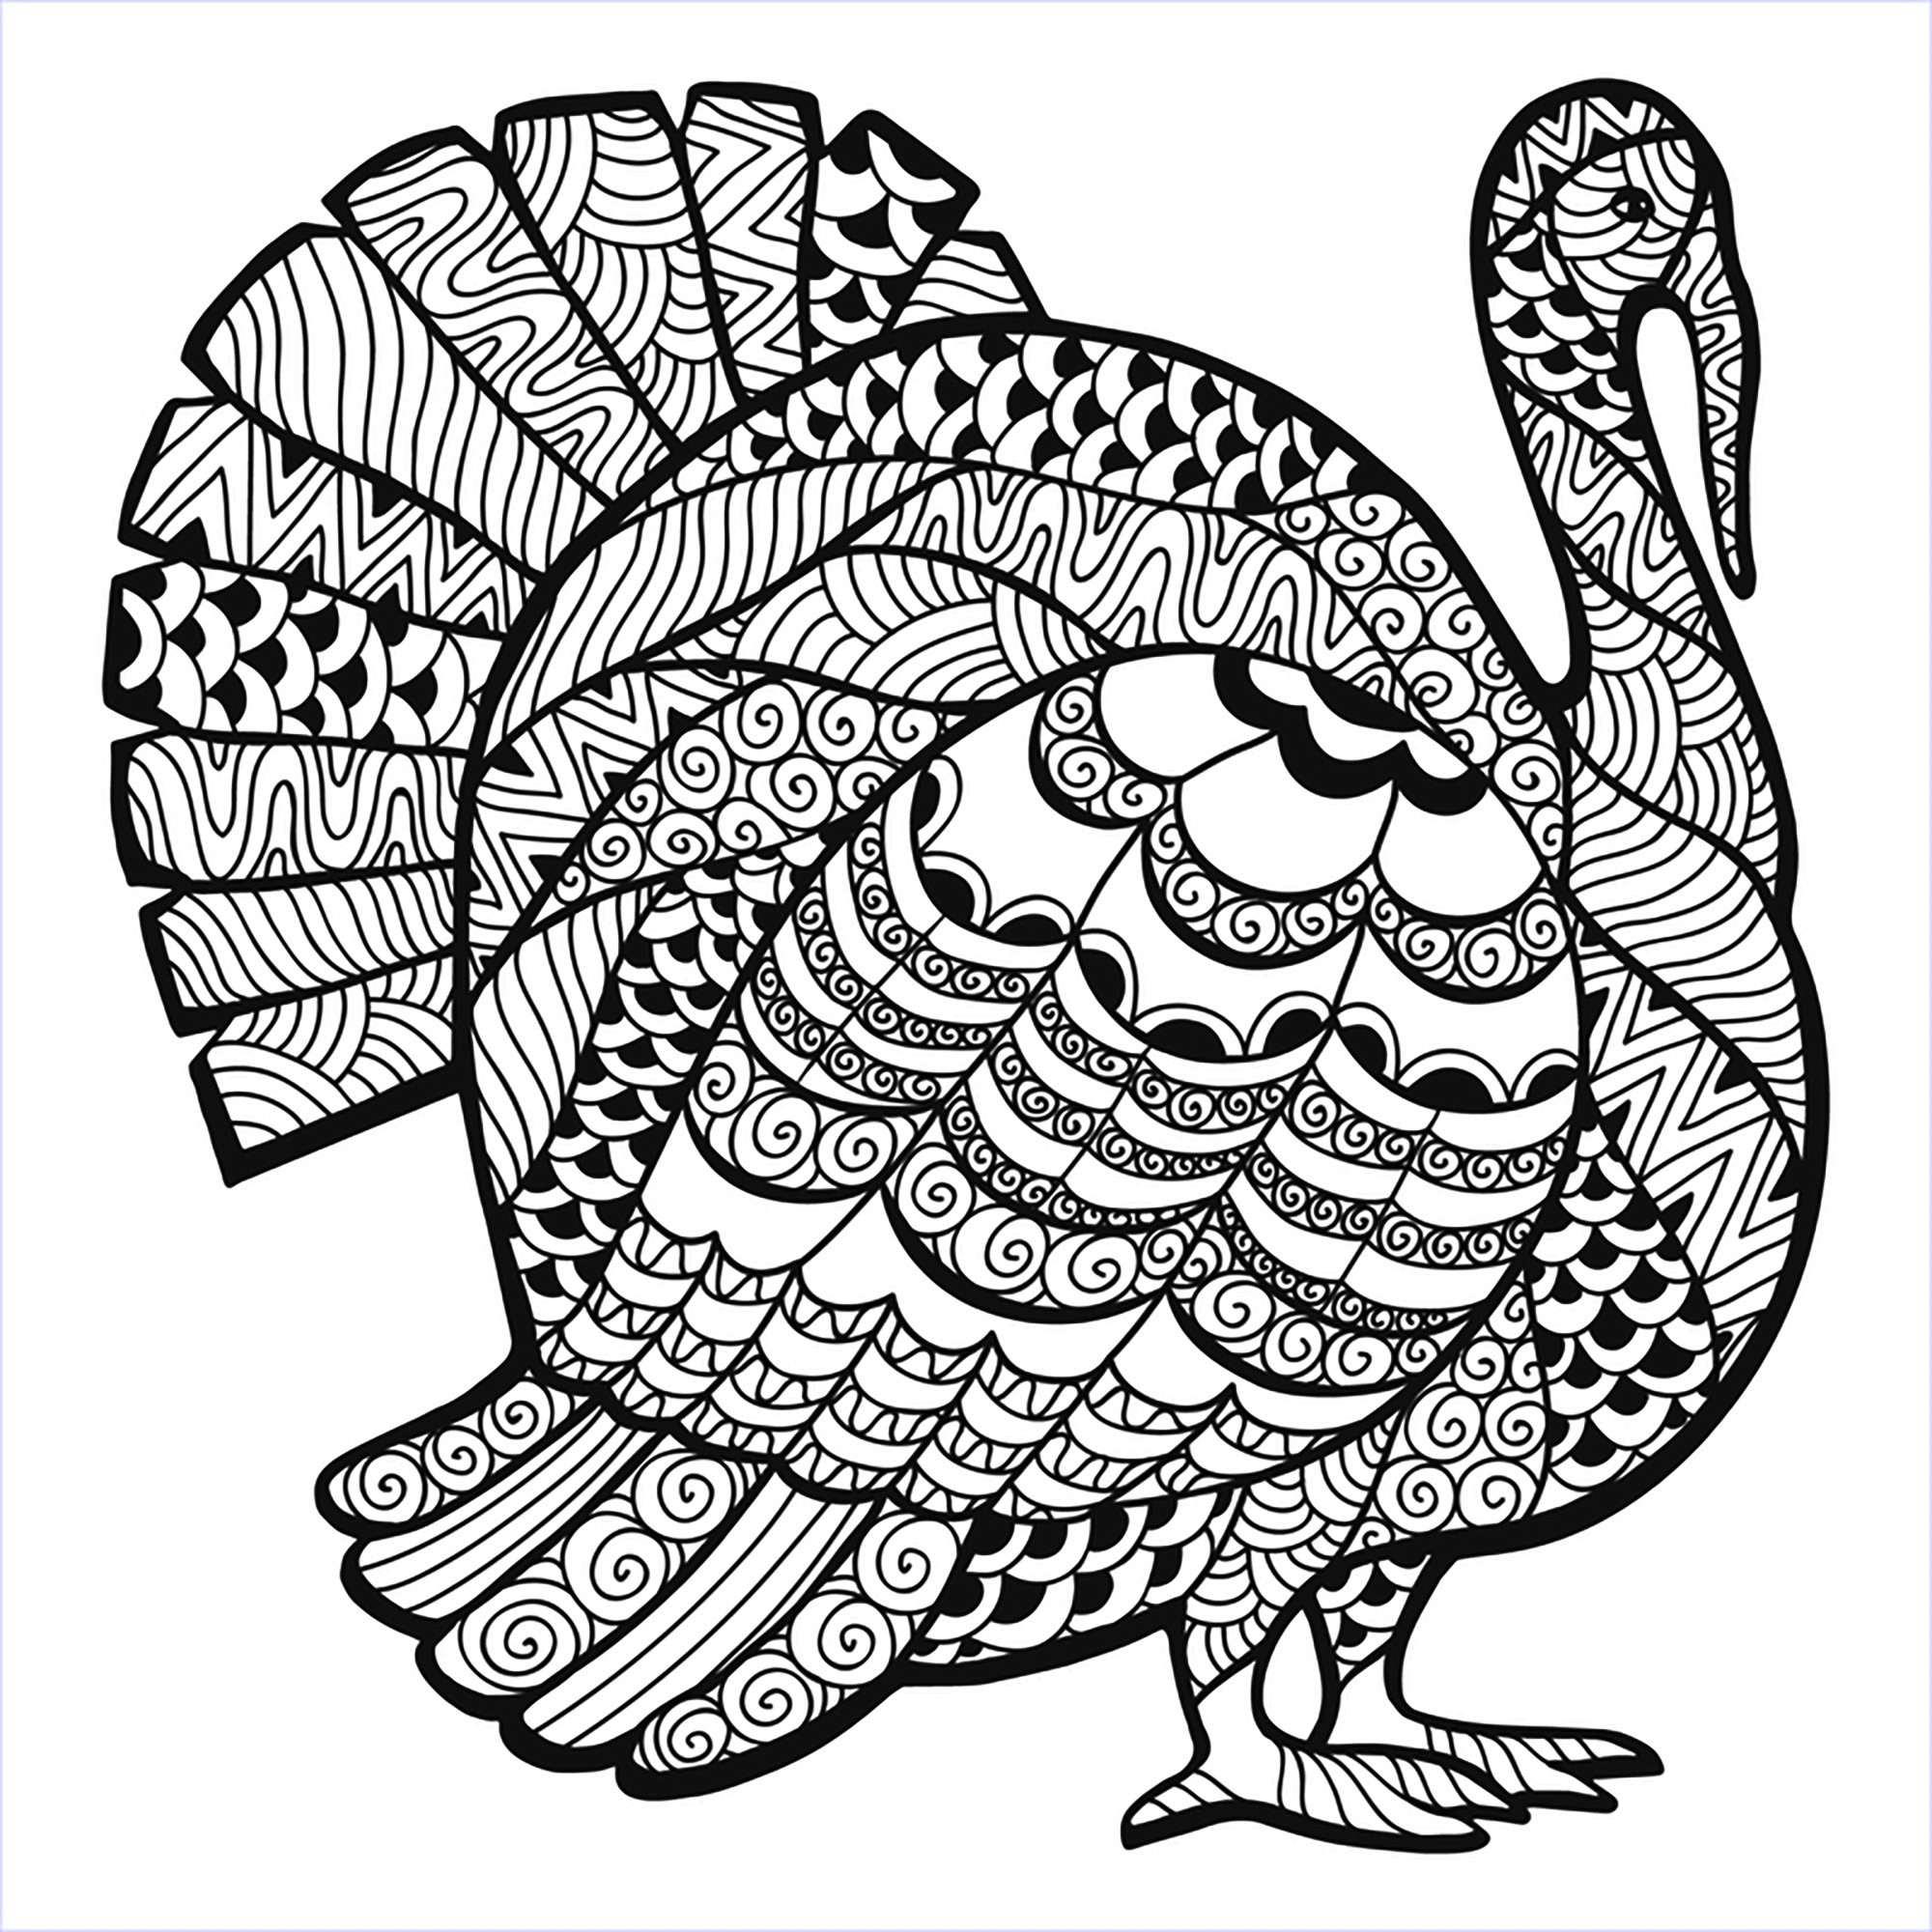 Thanksgiving Turkey Coloring Page
 Thanksgiving Coloring Pages For Adults to and